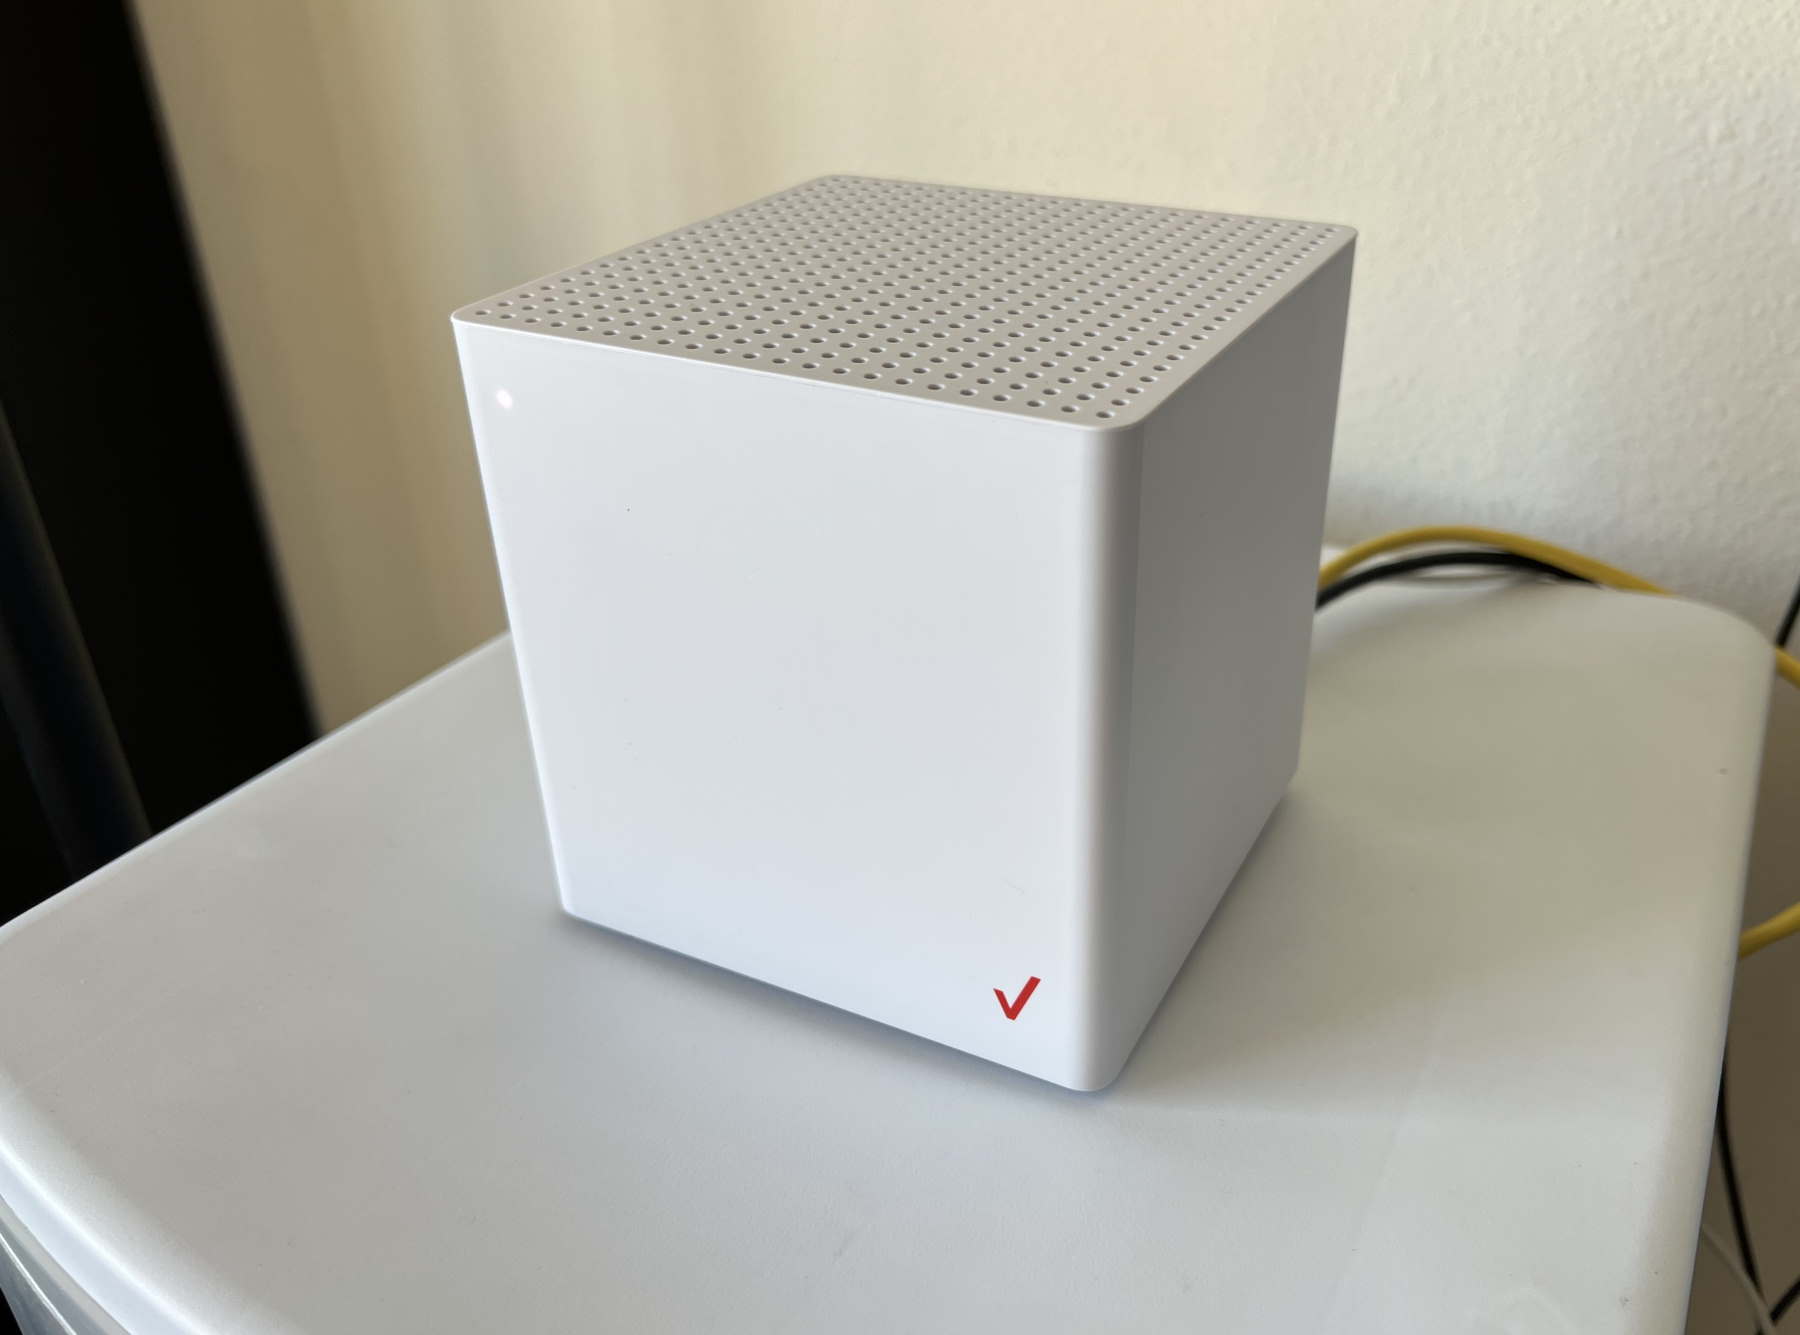 Verizon 5G Home Internet: The Good and the Bad. My Full Review in